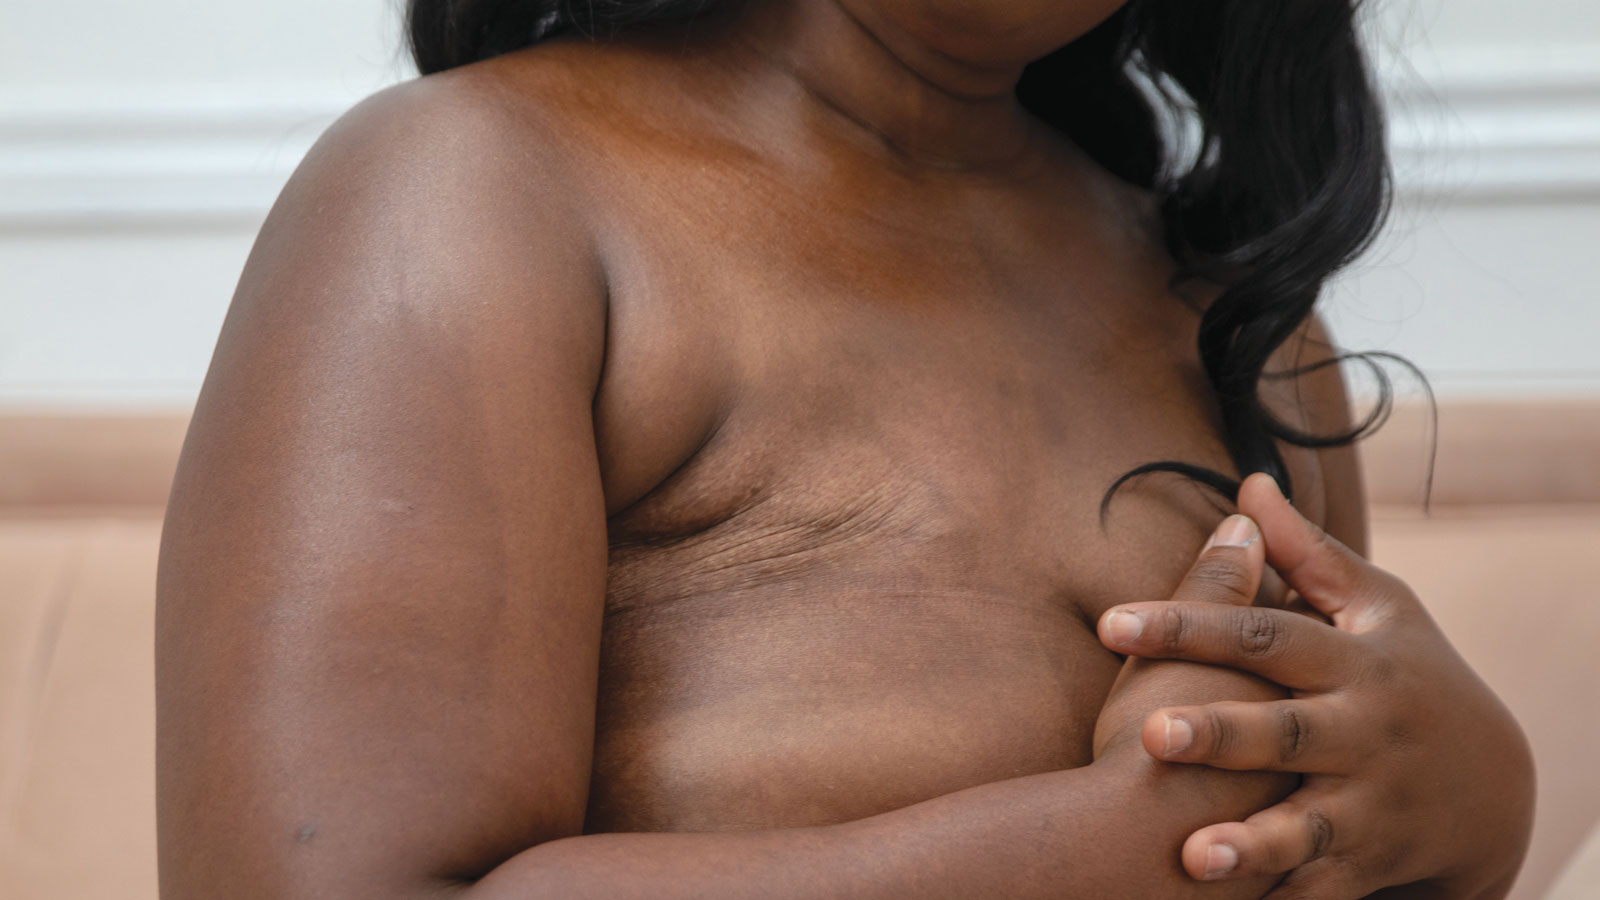 Keisha Uncovered: A Breast Recognition Project - Rethink Breast Cancer